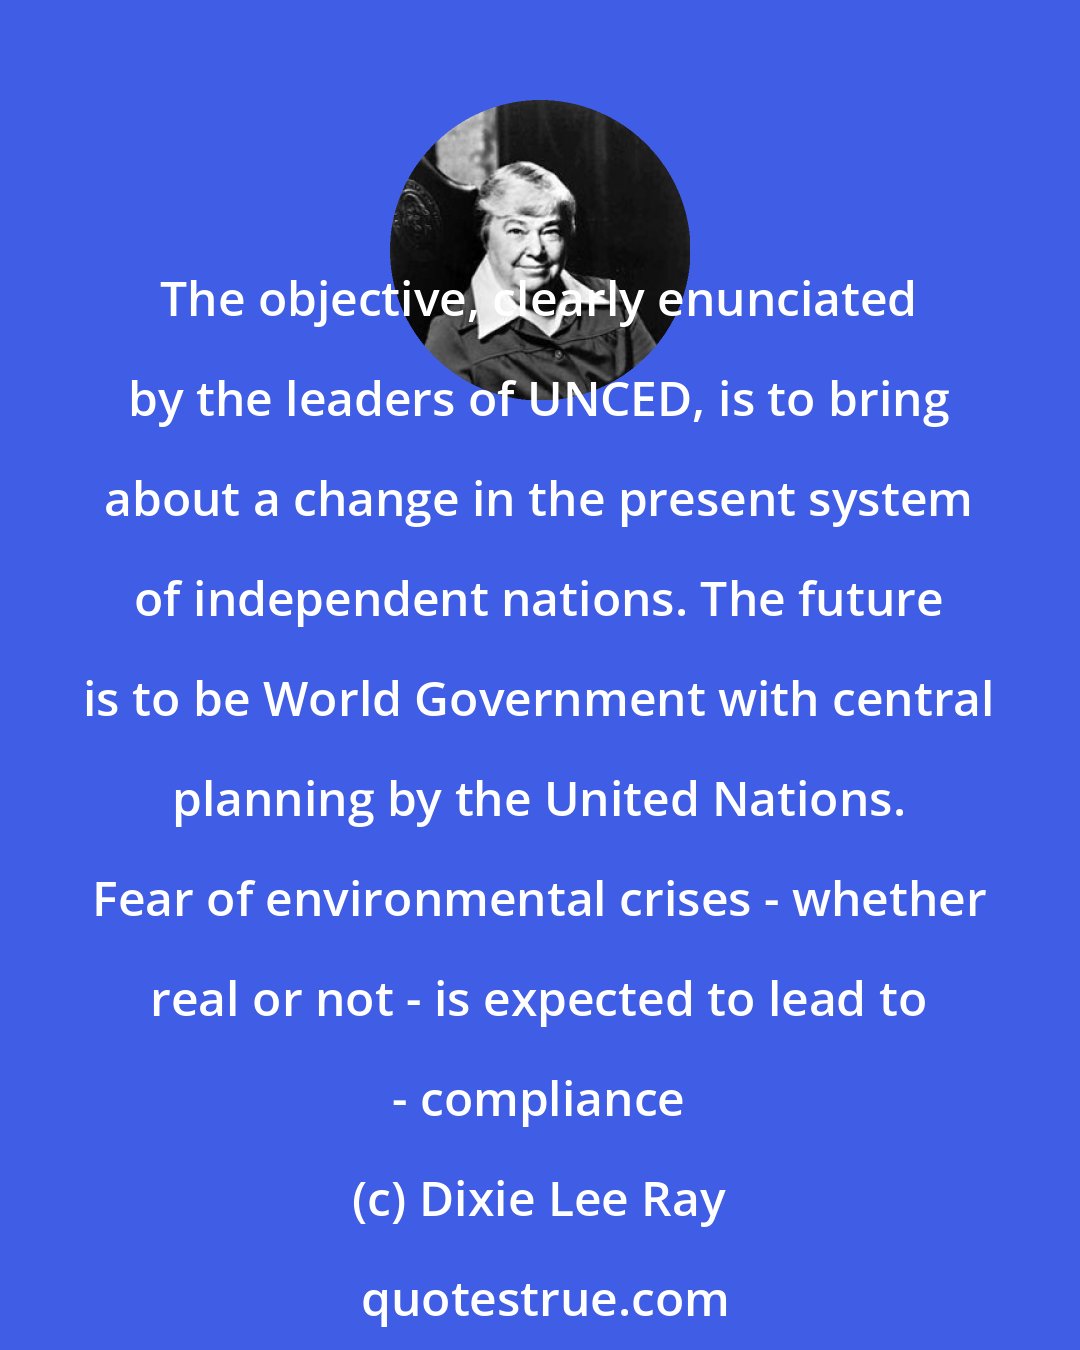 Dixie Lee Ray: The objective, clearly enunciated by the leaders of UNCED, is to bring about a change in the present system of independent nations. The future is to be World Government with central planning by the United Nations. Fear of environmental crises - whether real or not - is expected to lead to - compliance